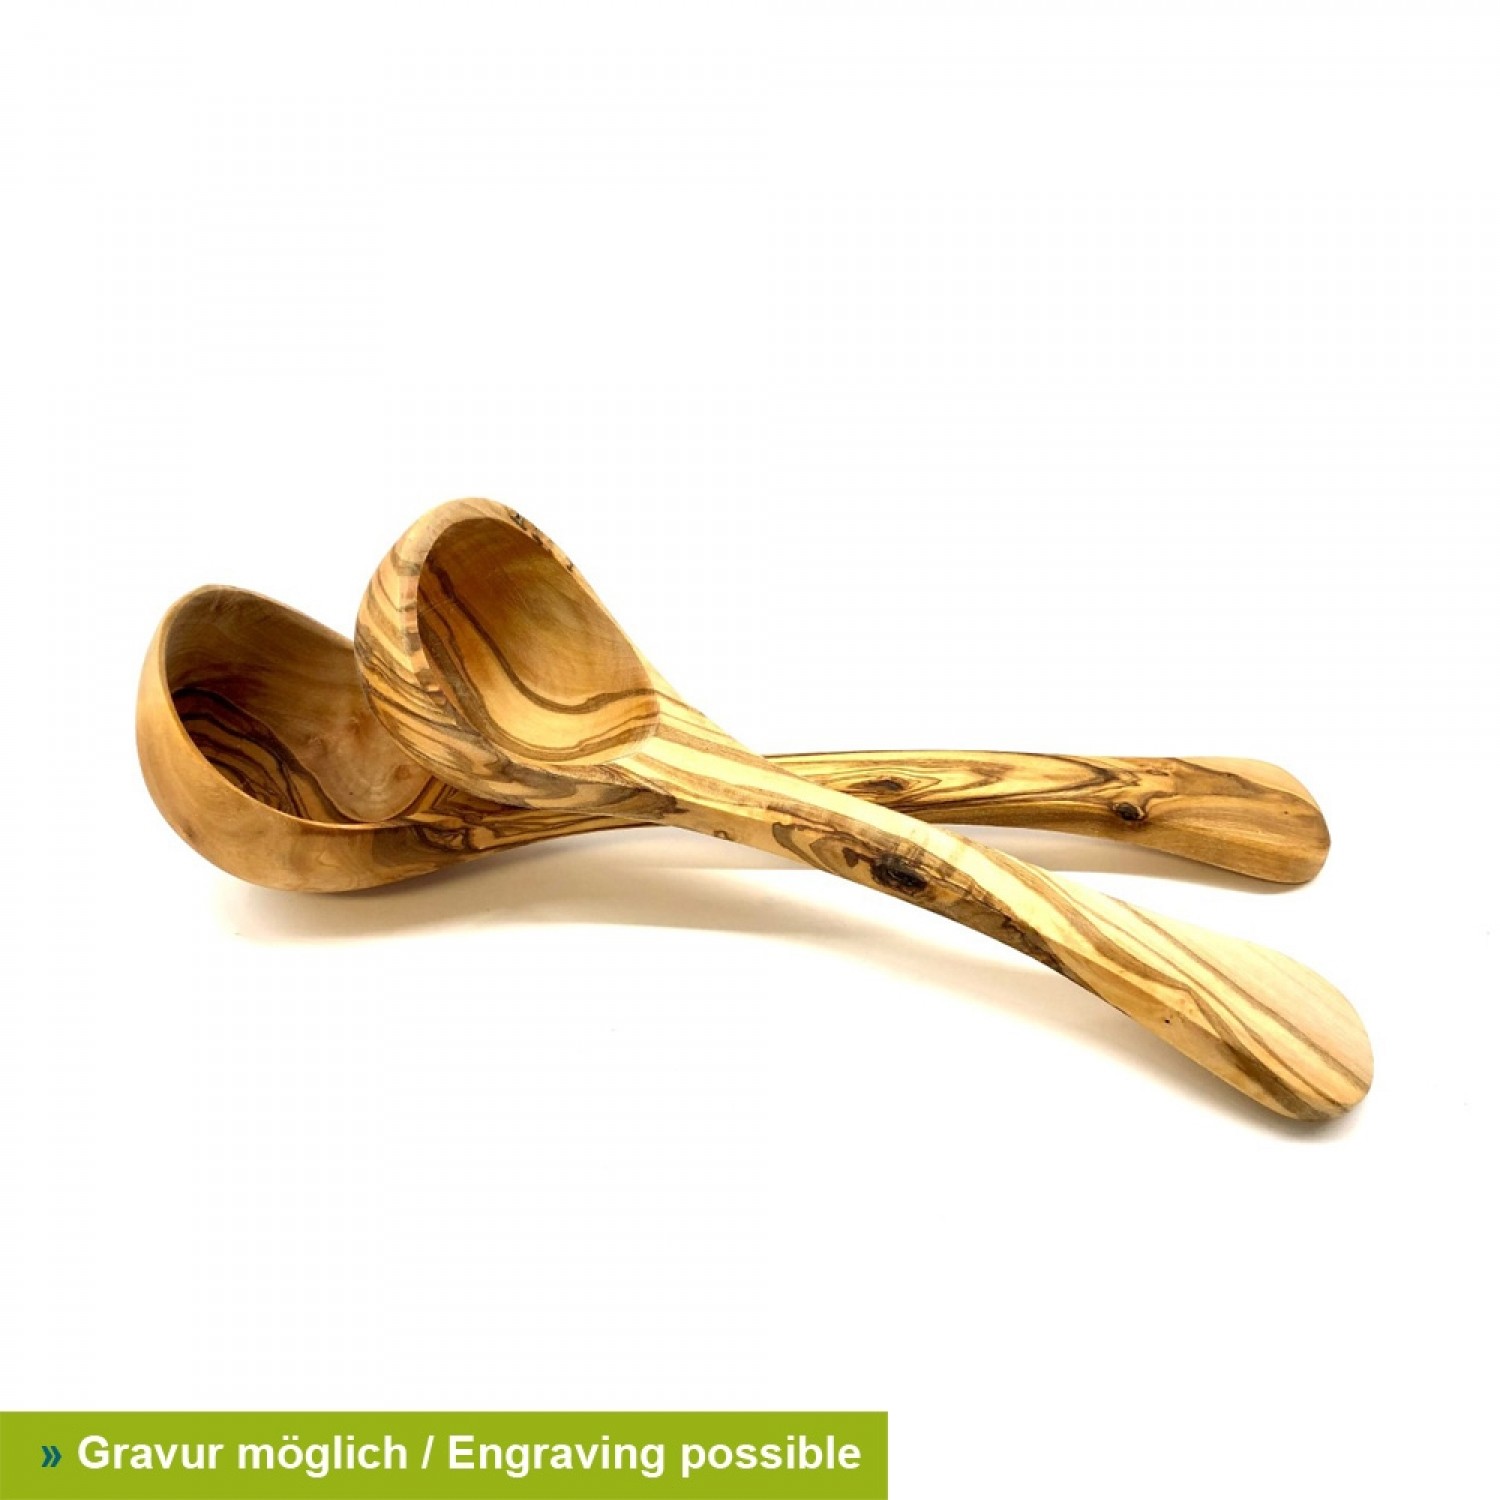 Olive Wood Ladle & Scoop, Engraving possible » D.O.M.